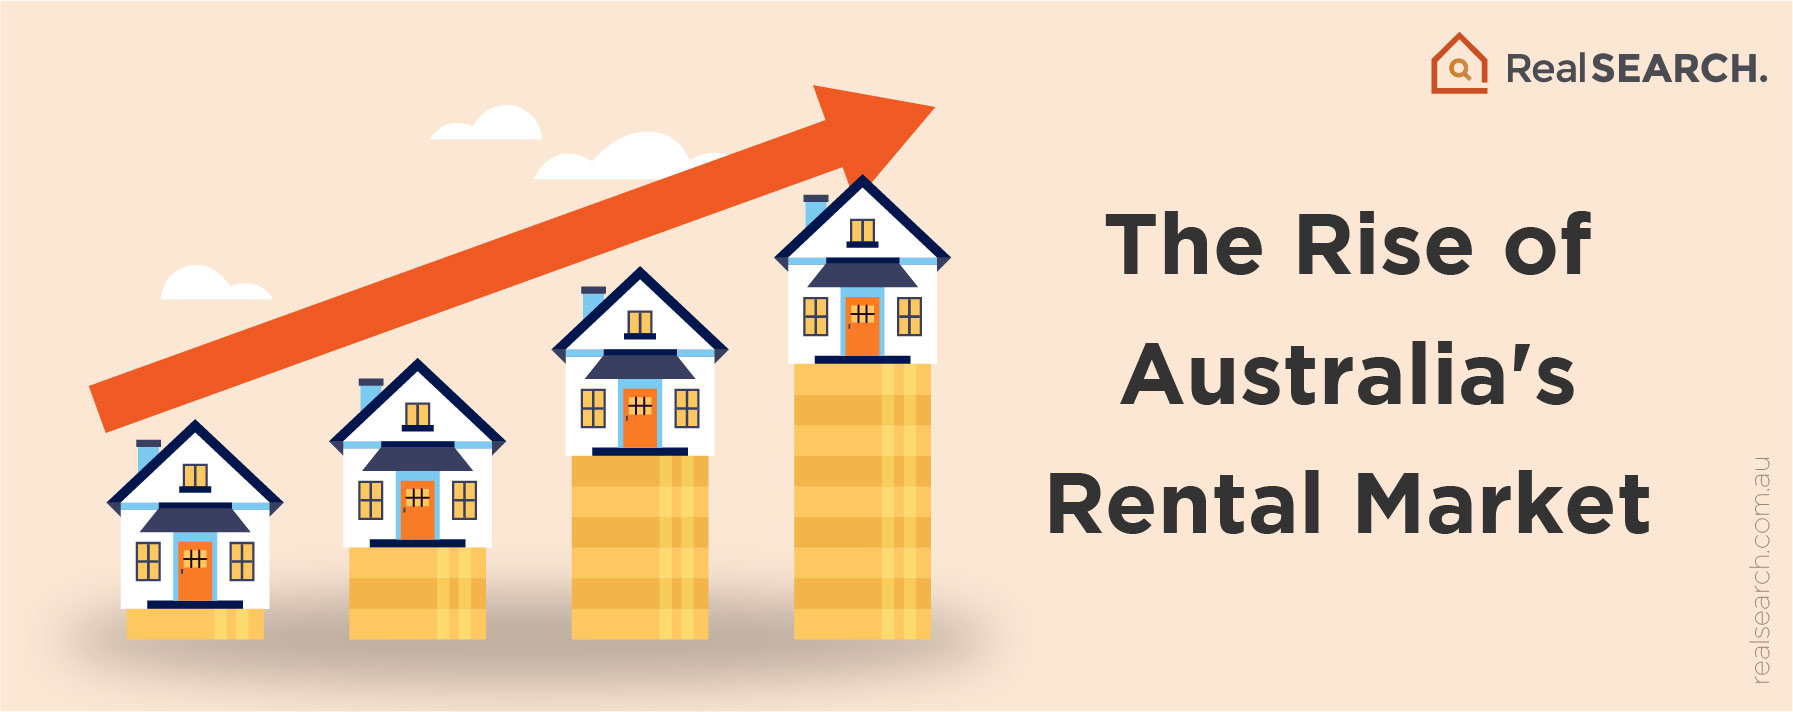 The Rise of Australia's Rental Market: What Buyers Need to Know